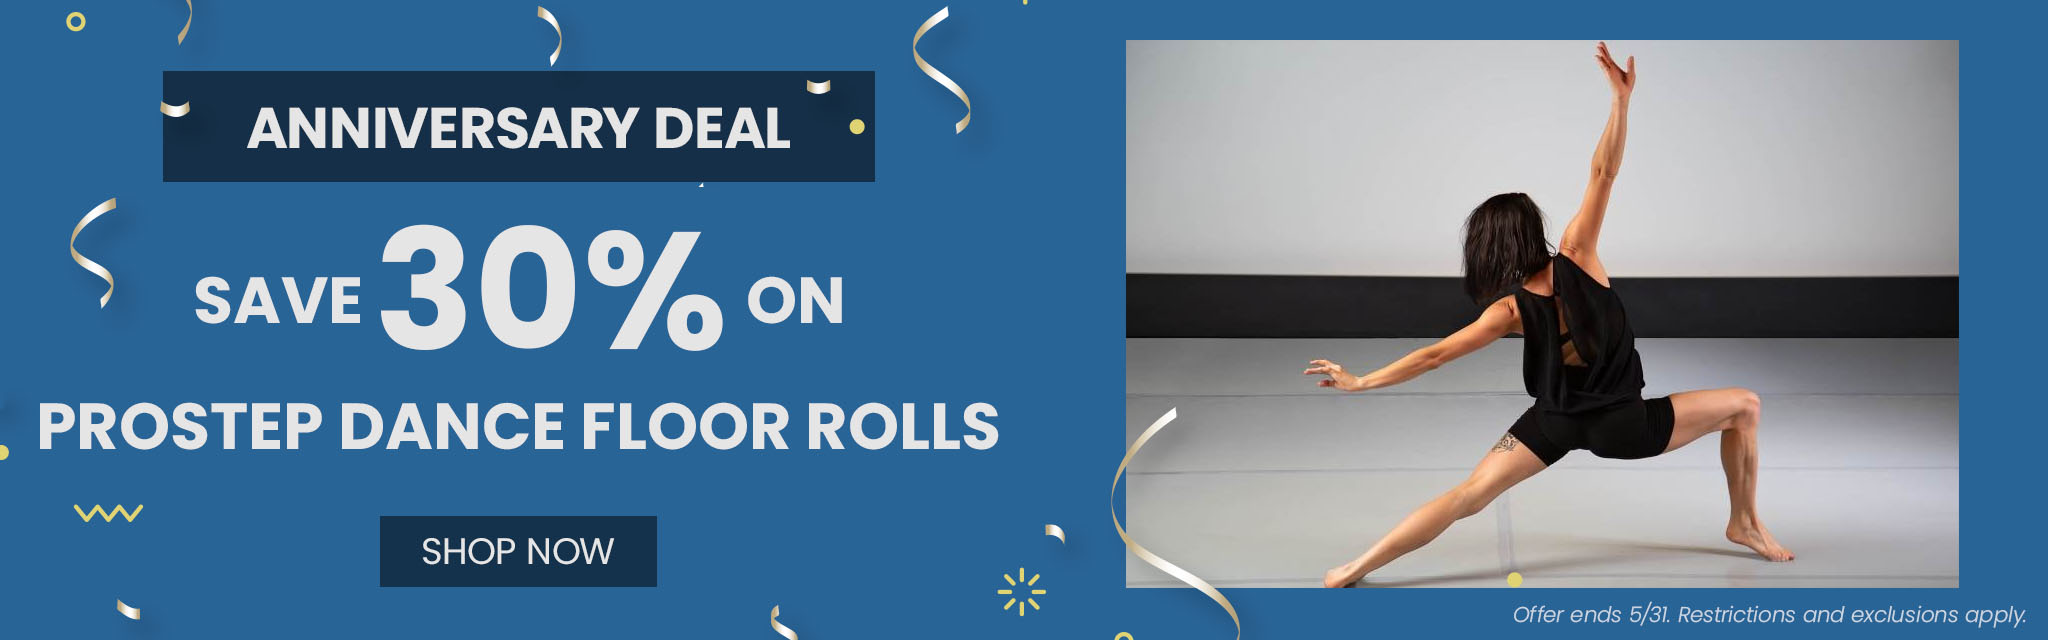 Anniversary Deal | Save 30%* On ProStep Dance Floor Rolls CTA: Shop Now Ends 5/31. Restrictions and exclusions apply. 